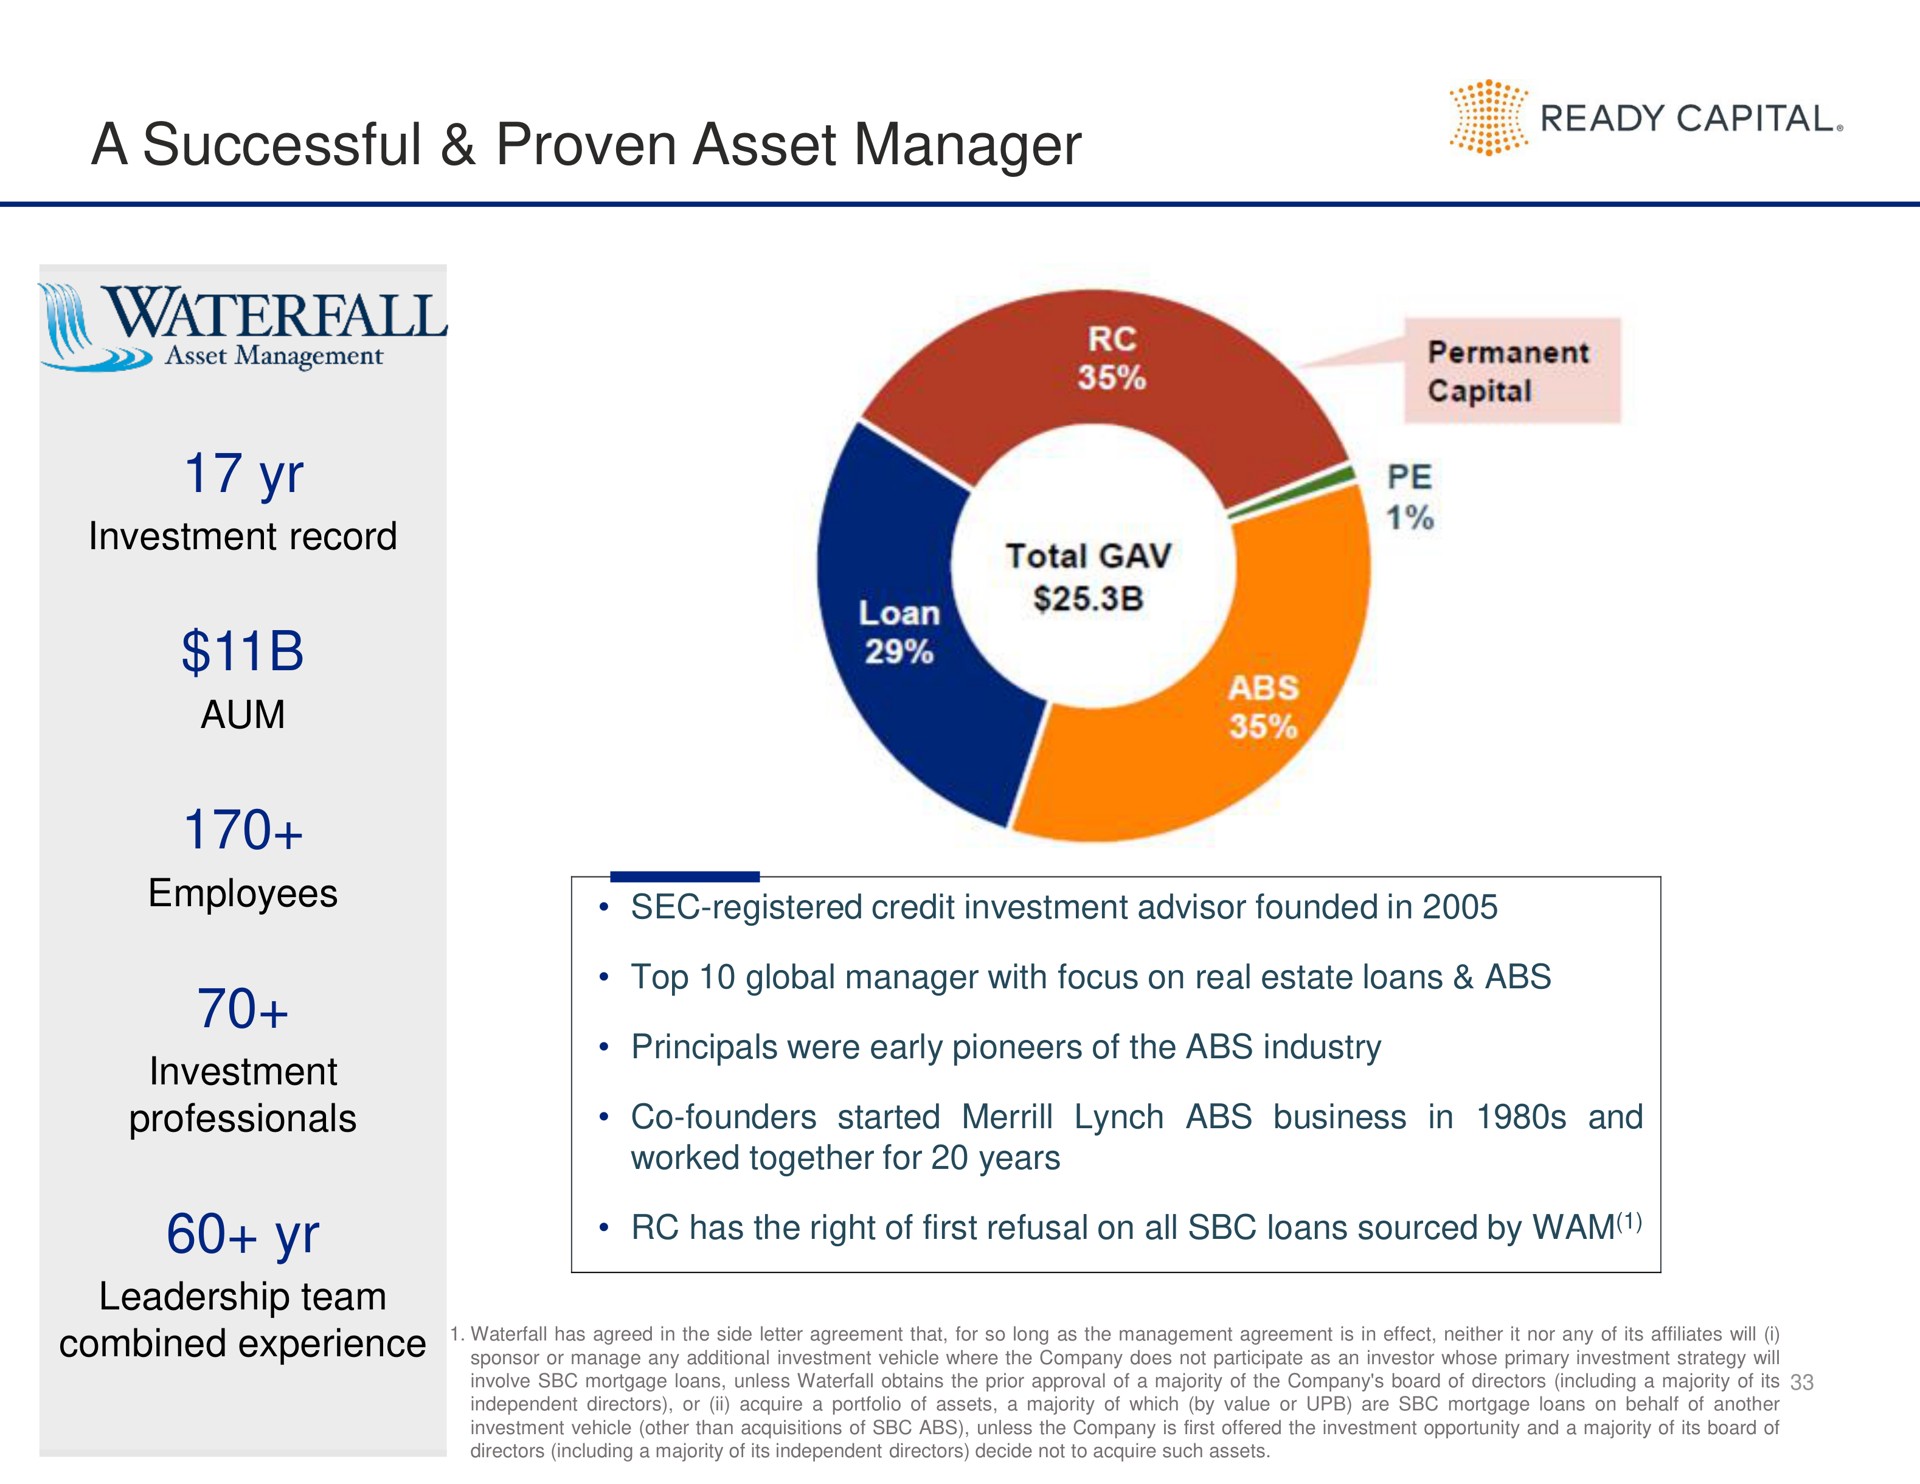 a successful proven asset manager ready capital waterfall aum | Ready Capital